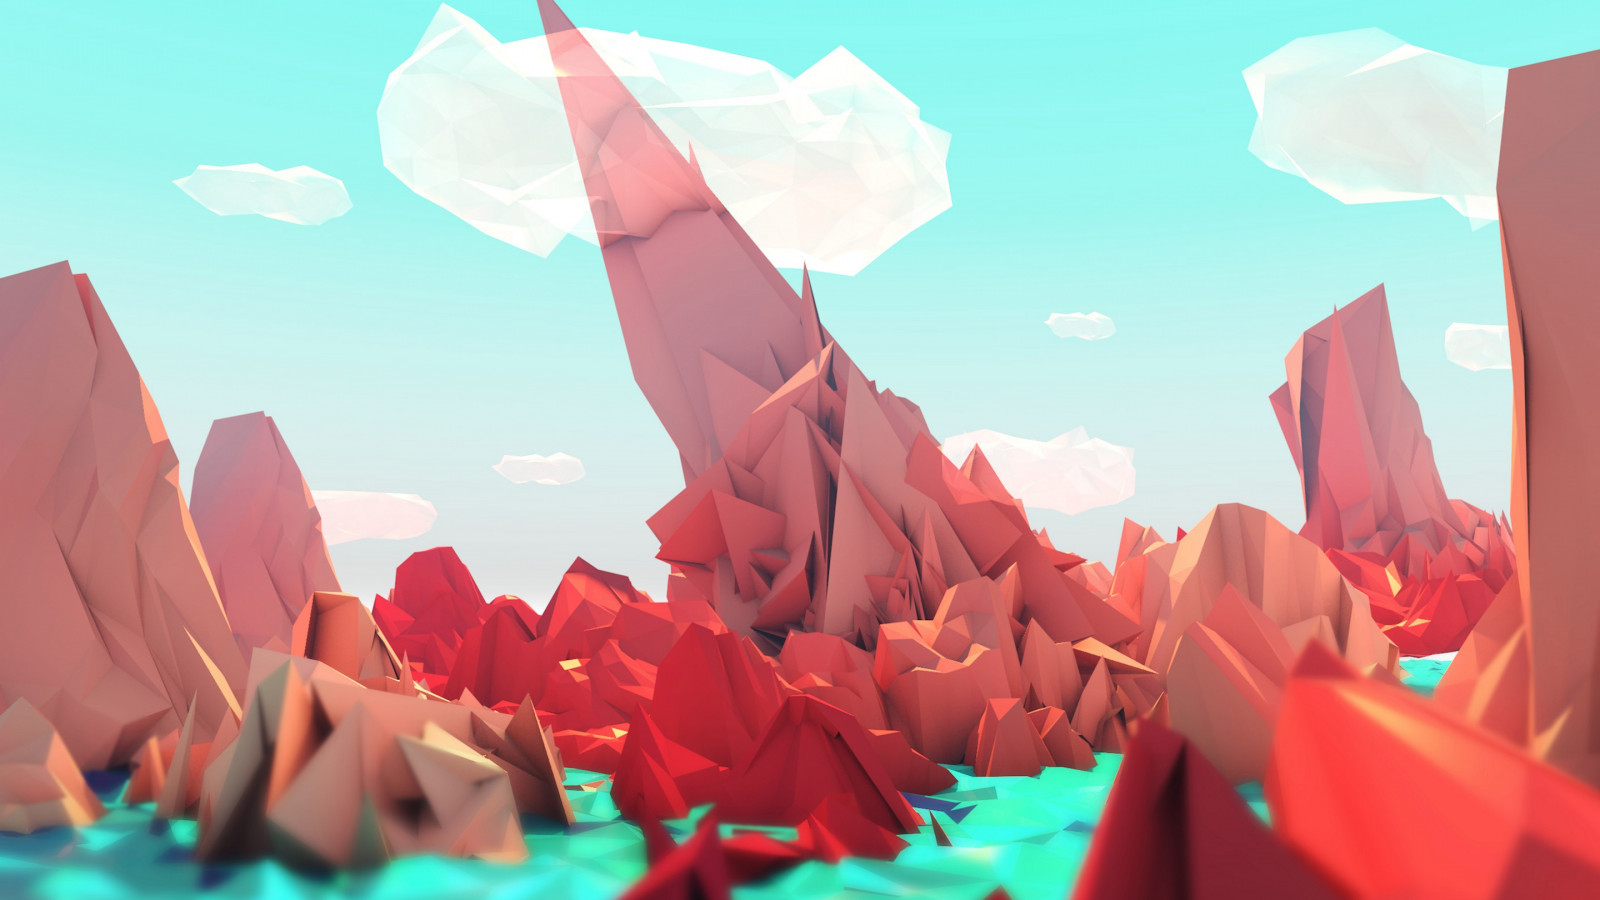 The red mountains. Low poly illustration wallpaper 1600x900